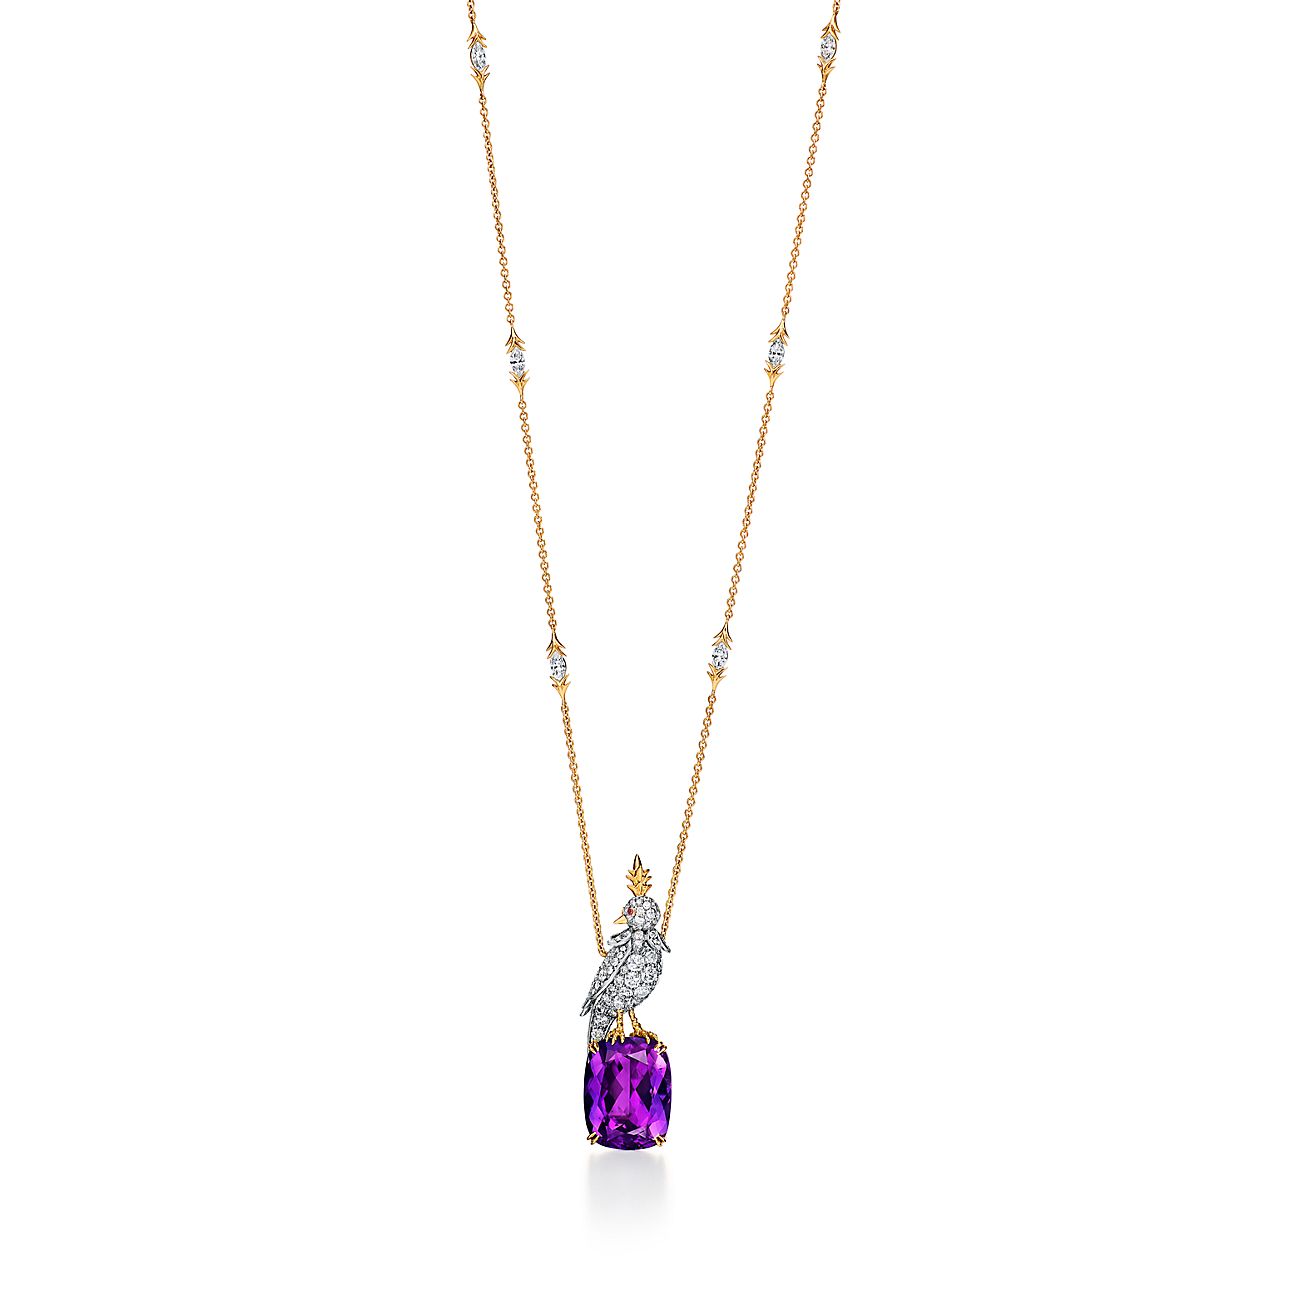 Pendant in Gold and Platinum with an Amethyst, Diamonds and Pink